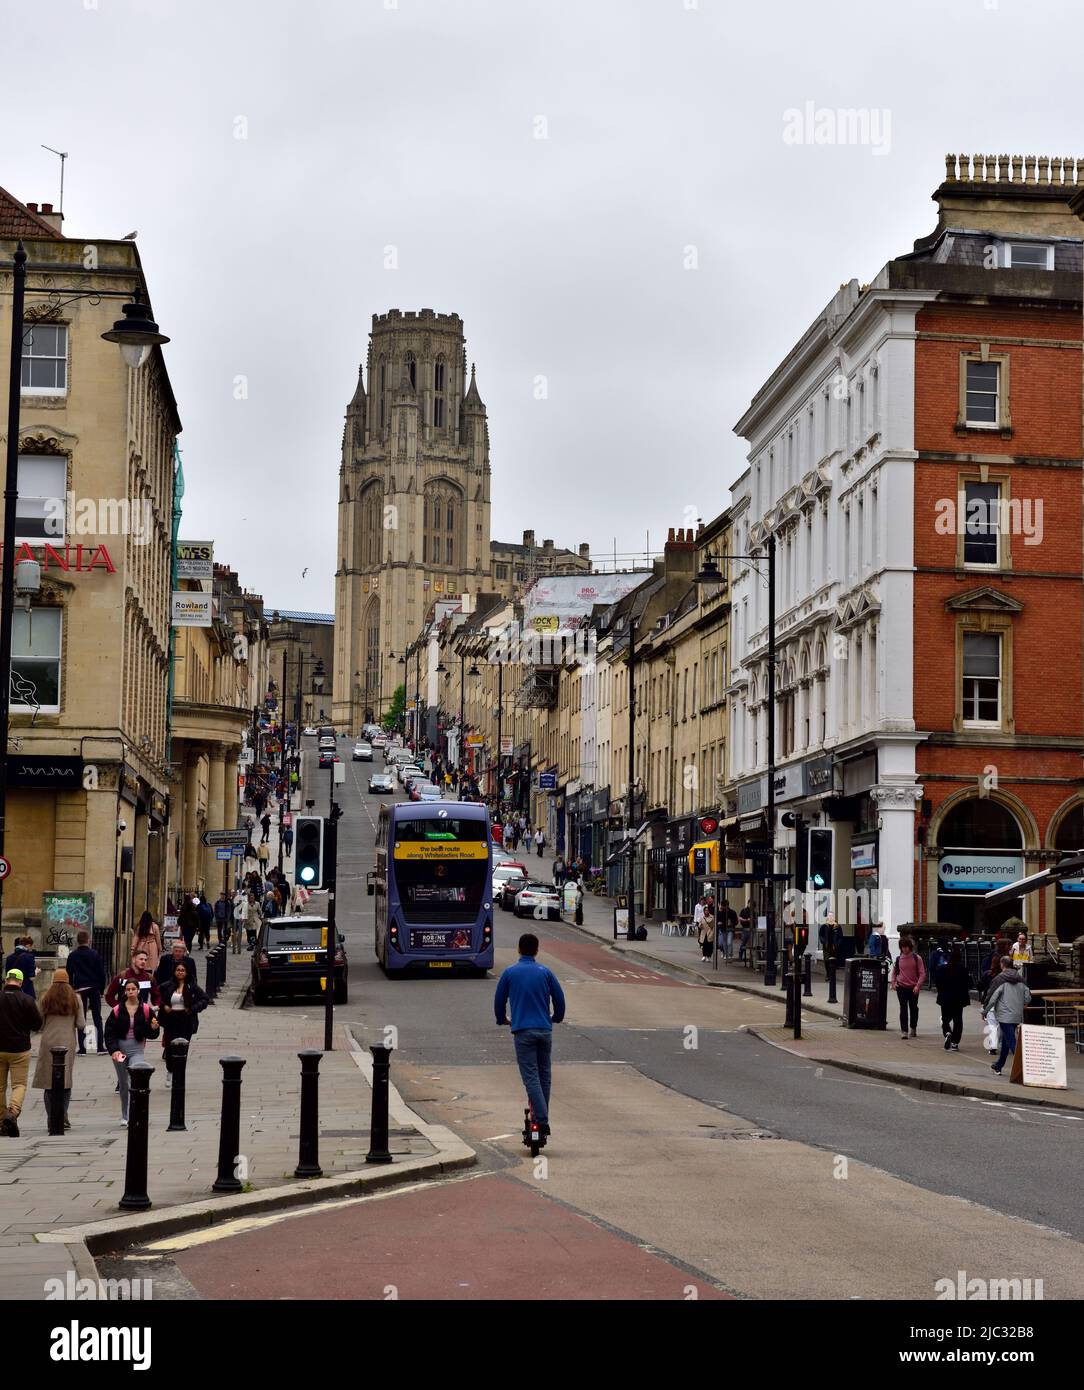 Looking up Park Street steep hill toward University Will Memorial building tower with bus and escooter, Bristol, UK Stock Photo